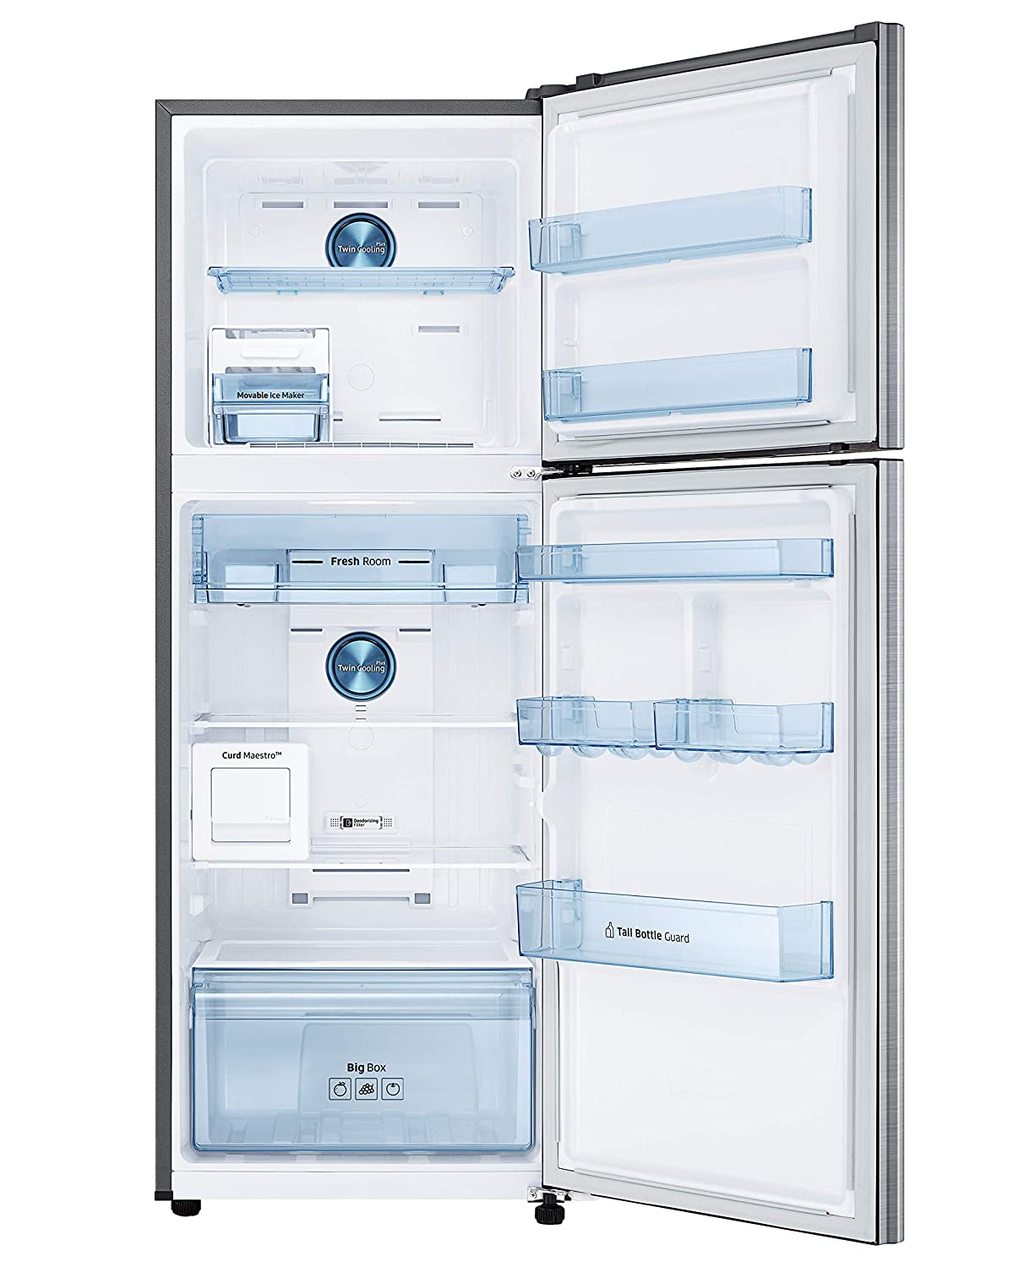 Samsung RT37A4633S8/HL 336 L 3 Star Inverter Frost Free Double Door Refrigerator